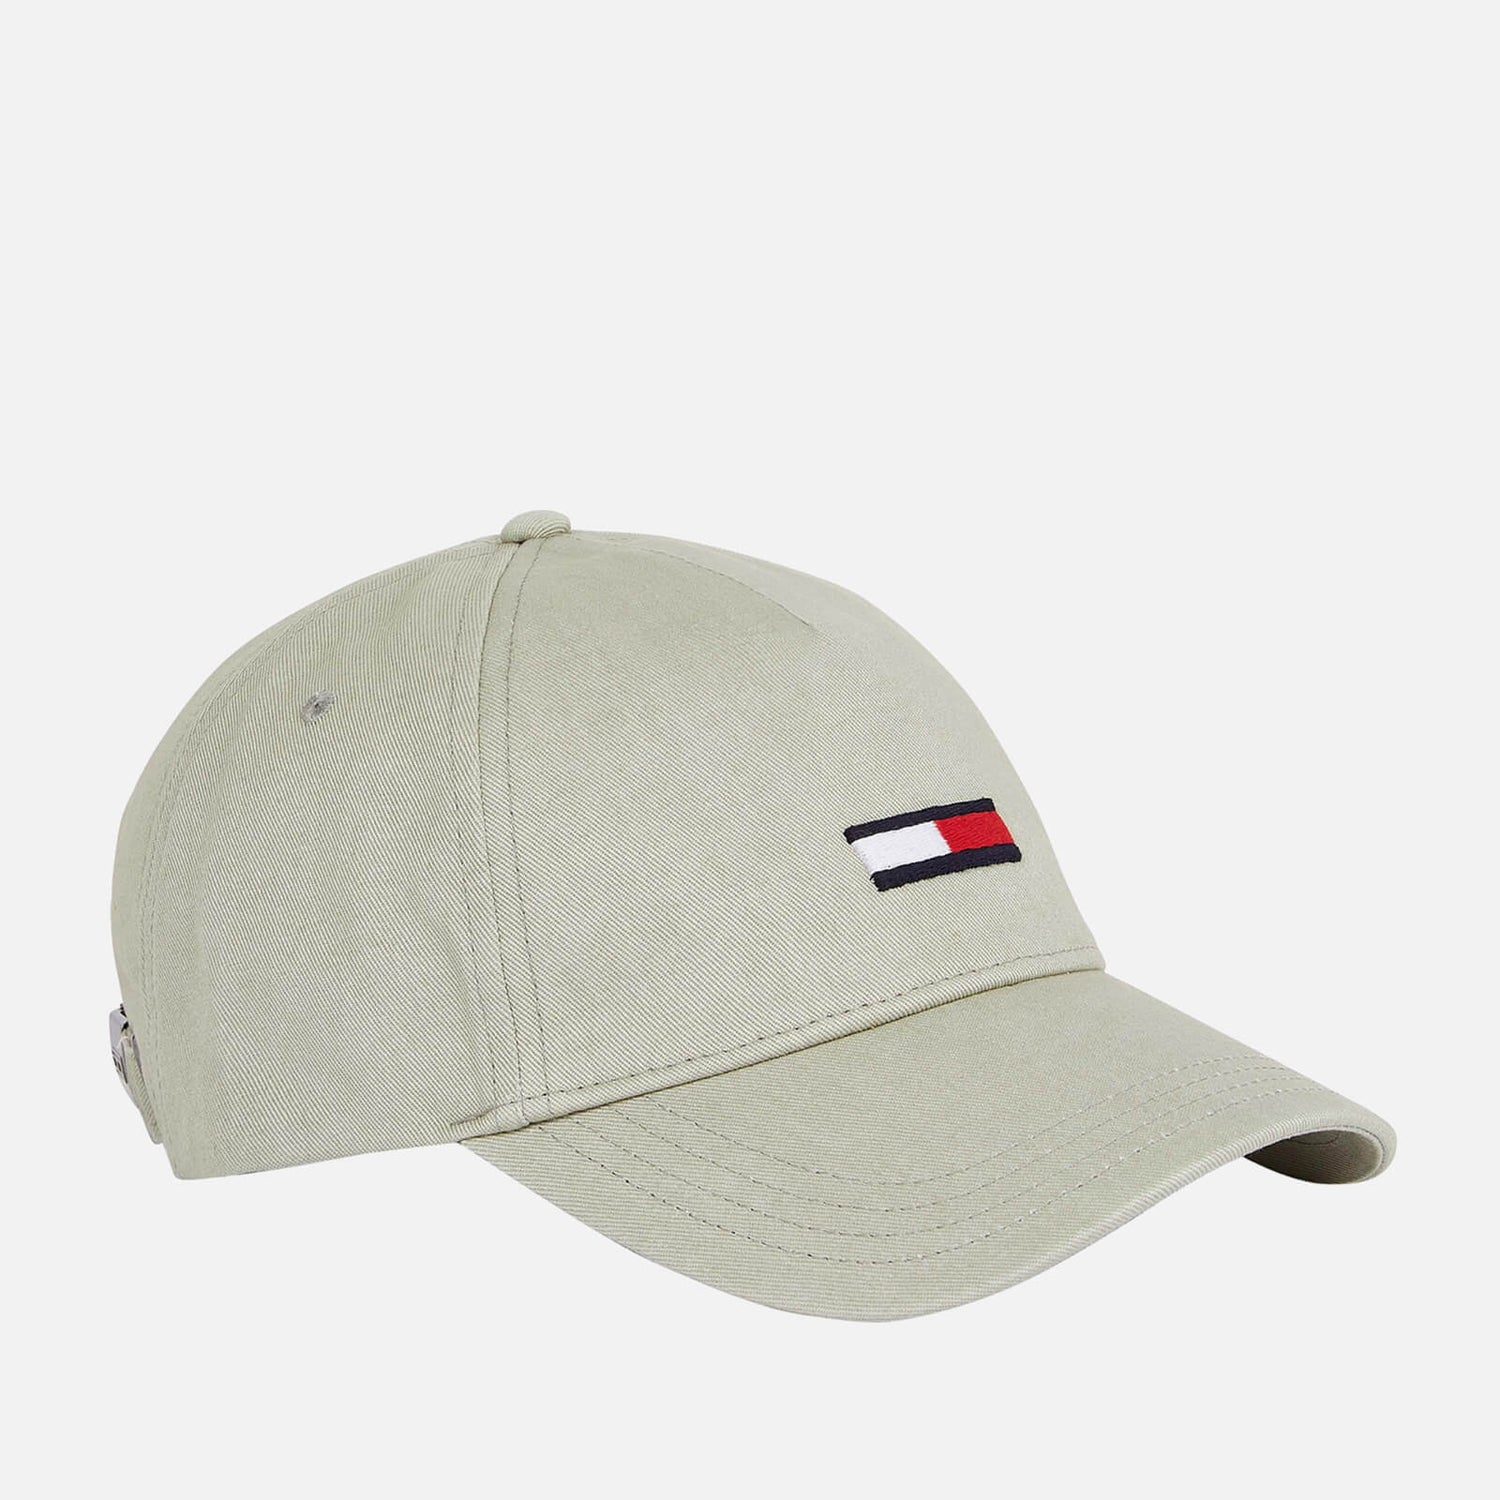 Tommy Jeans Men's Flag Cap - Faded Willow